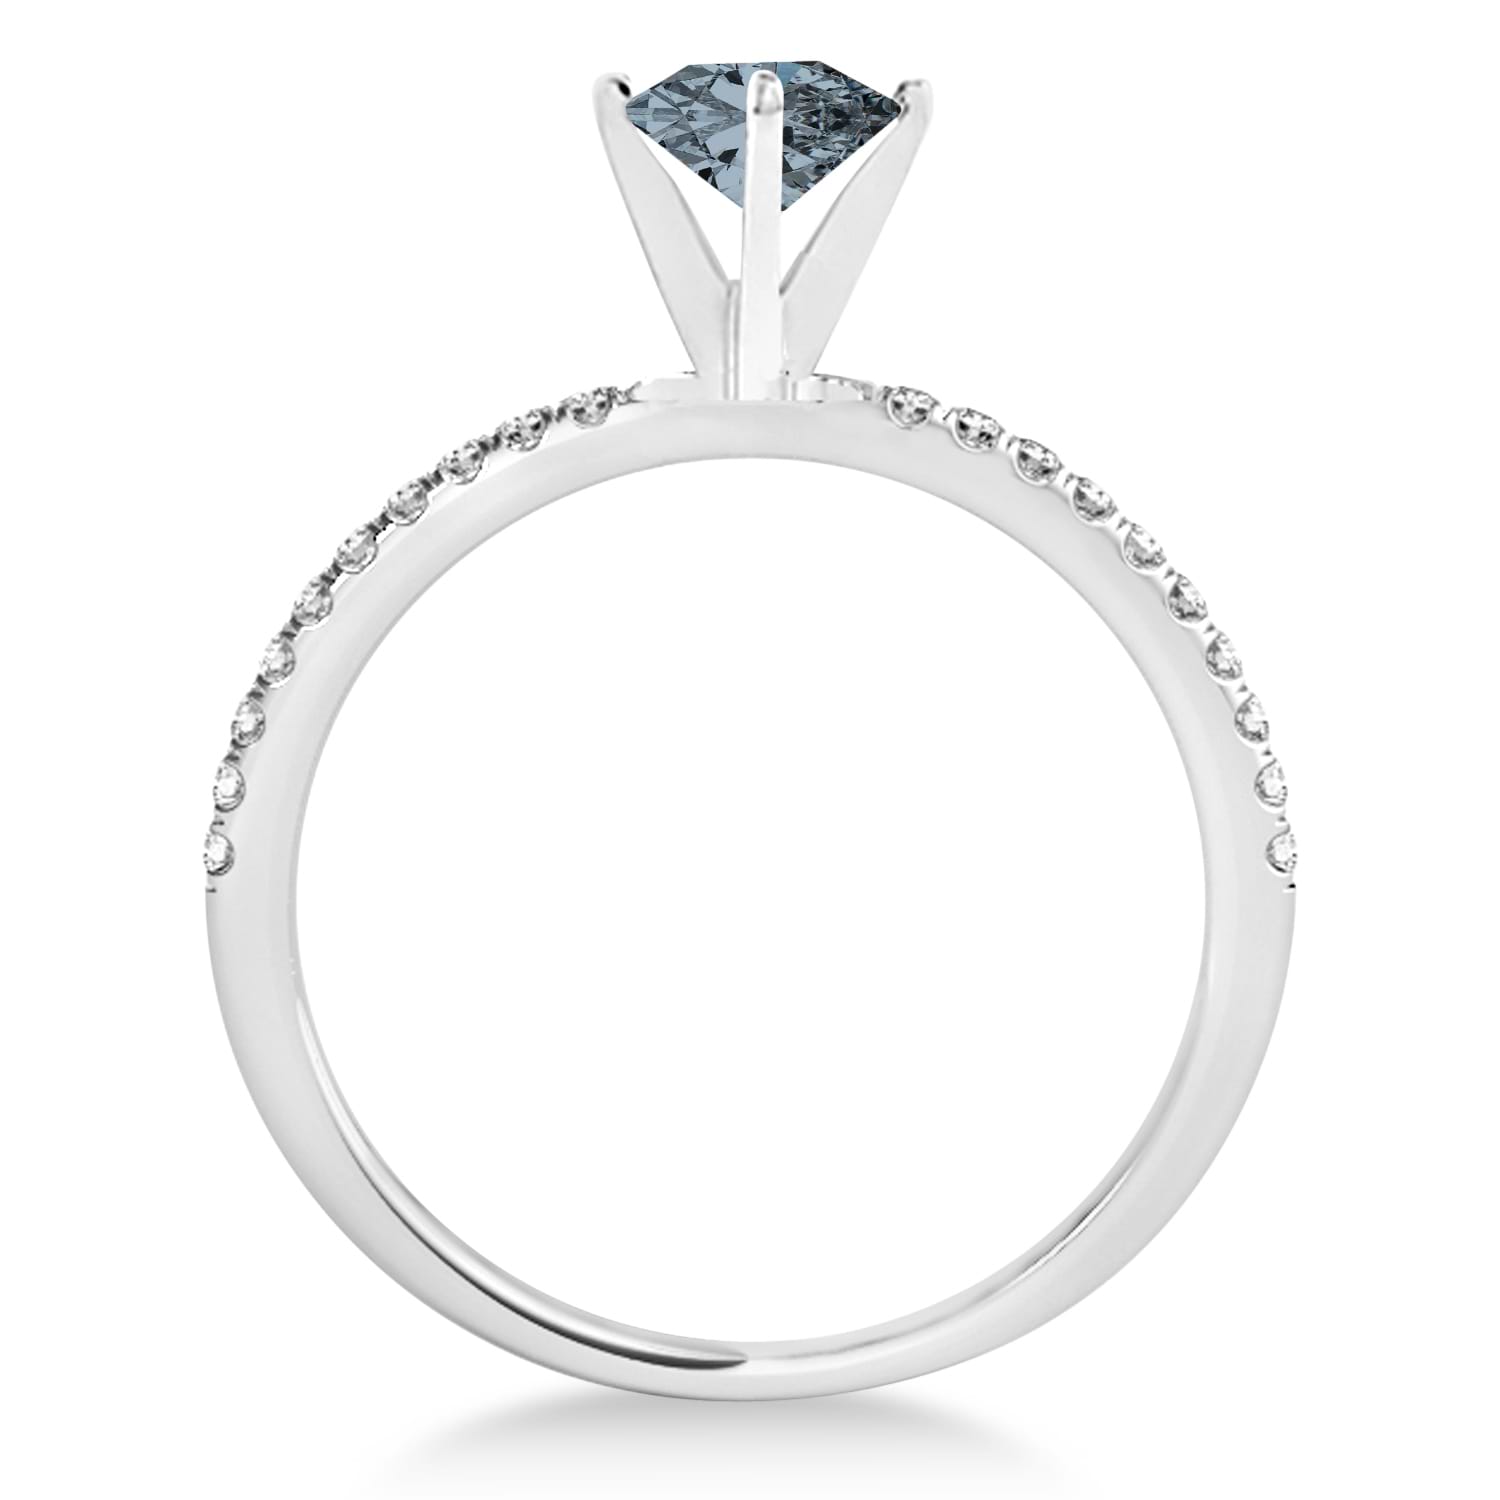 Gray Spinel & Diamond Accented Oval Shape Engagement Ring 14k White Gold (2.50ct)